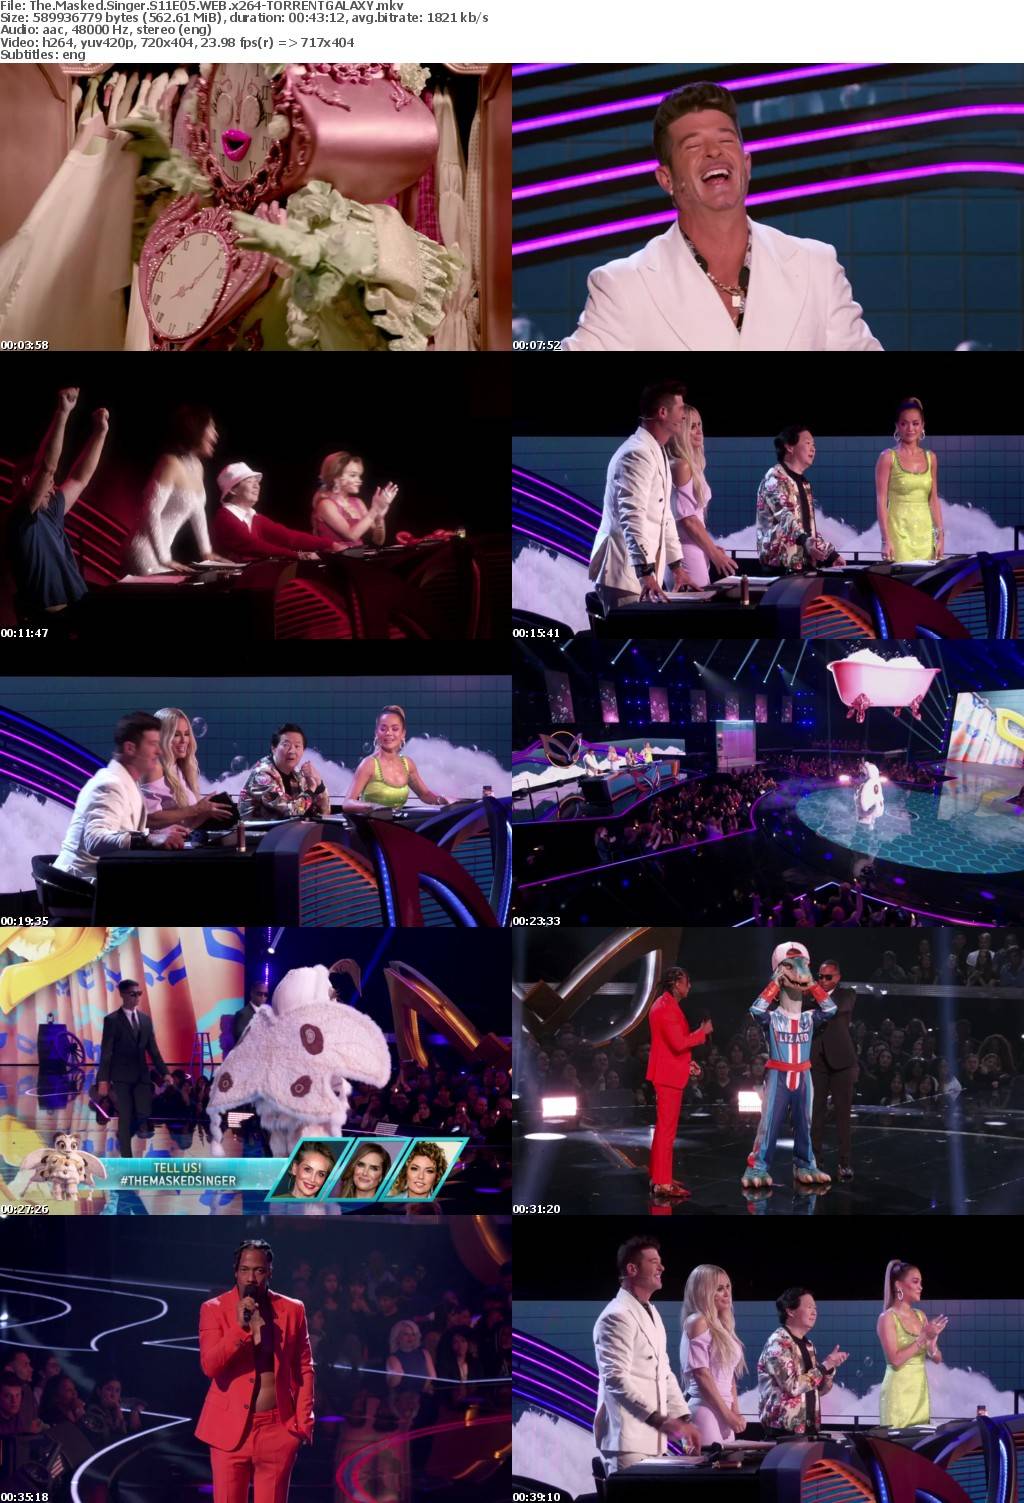 The Masked Singer S11E05 WEB x264-GALAXY